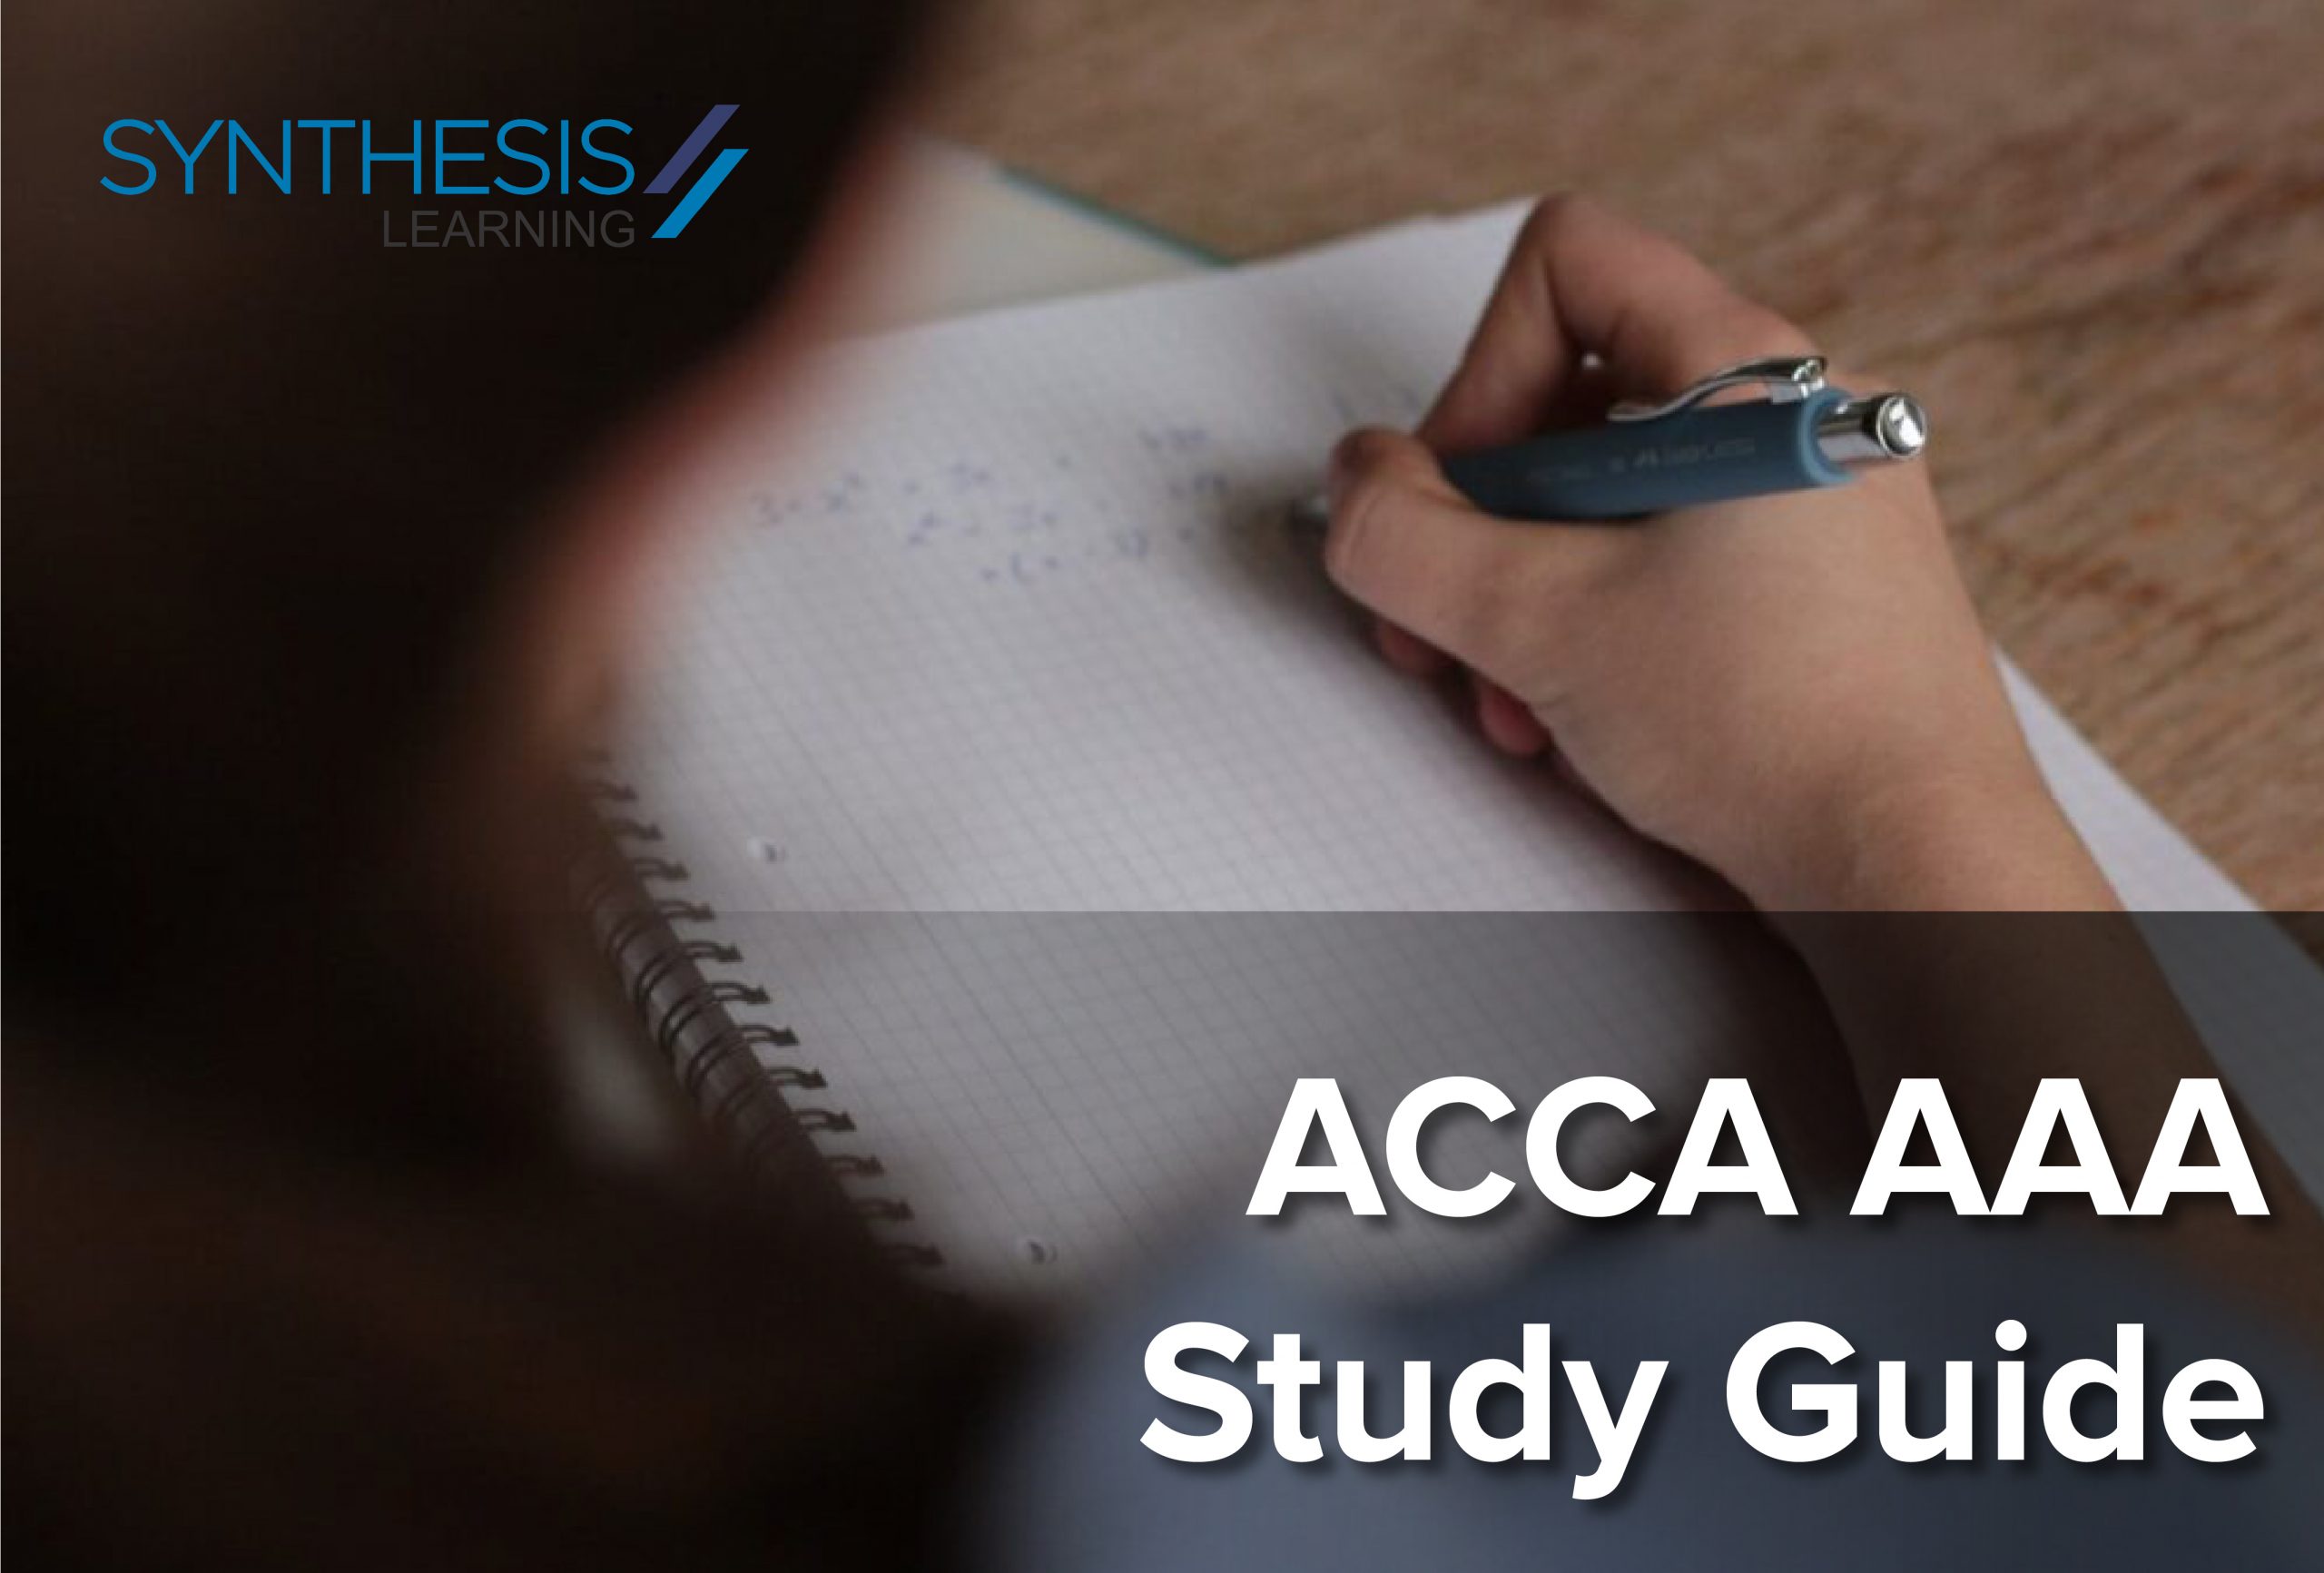 ACCA-AAA-Study-Guide-Featured-Image updated